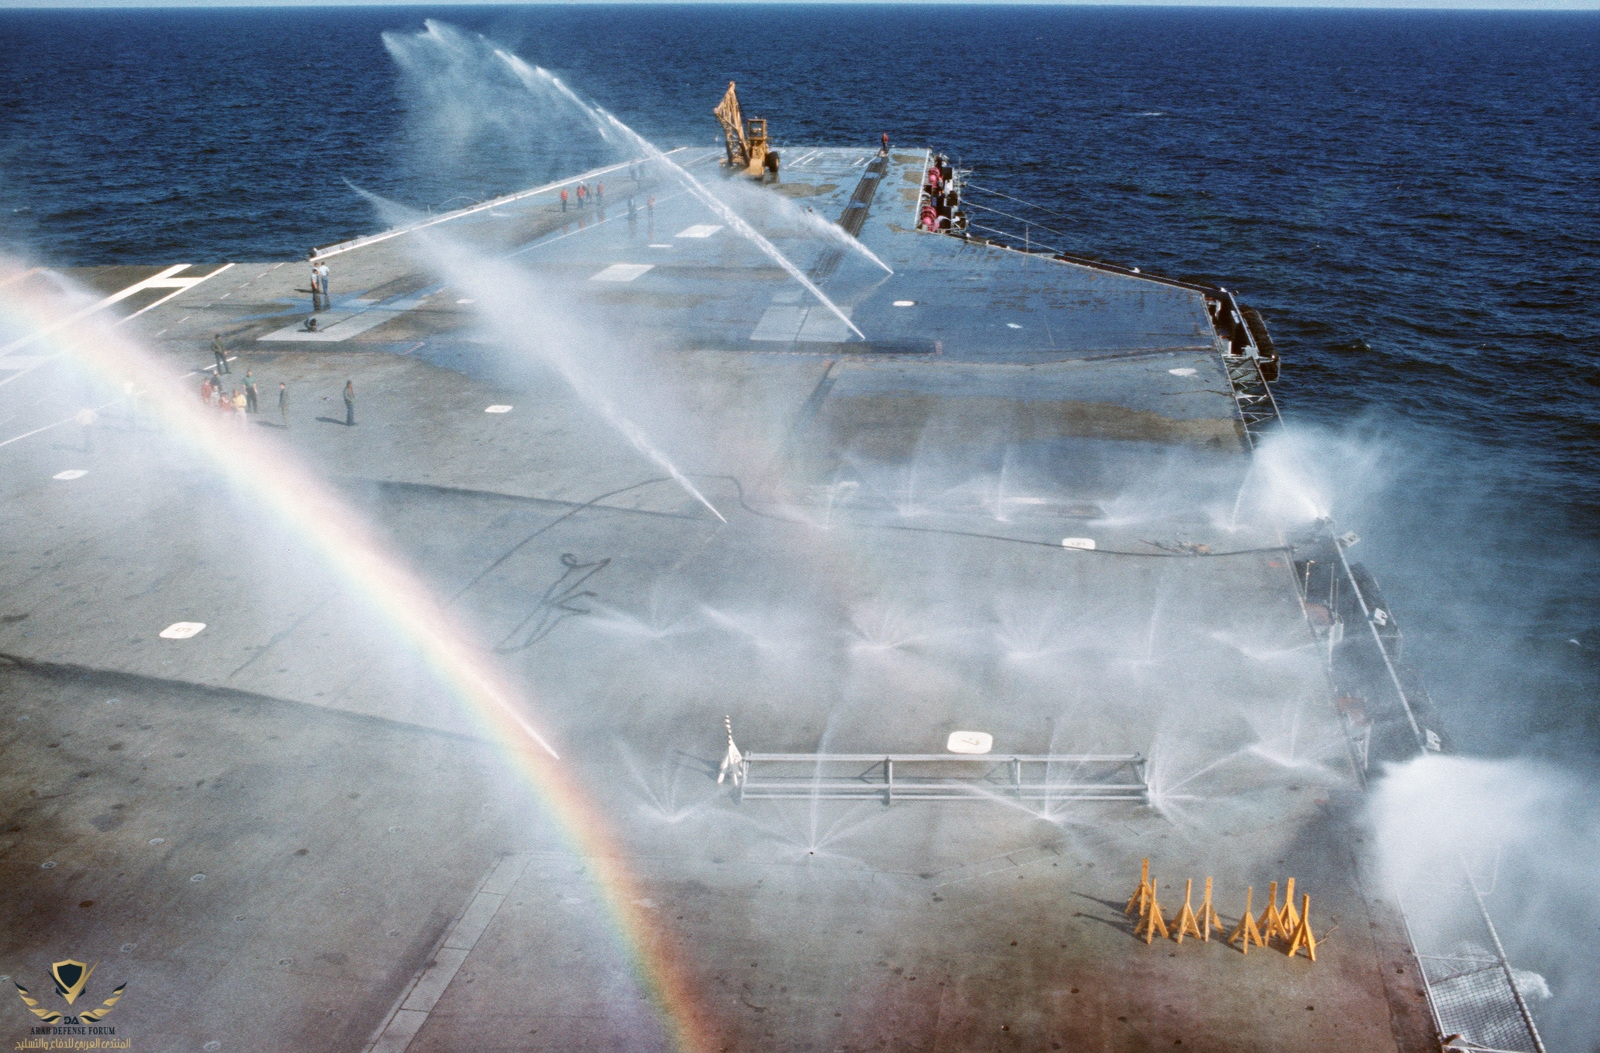 sea-water-spray-from-the-flight-deck-washdown-system-covers-the-deck-of-the-f0efeb-1600.jpg